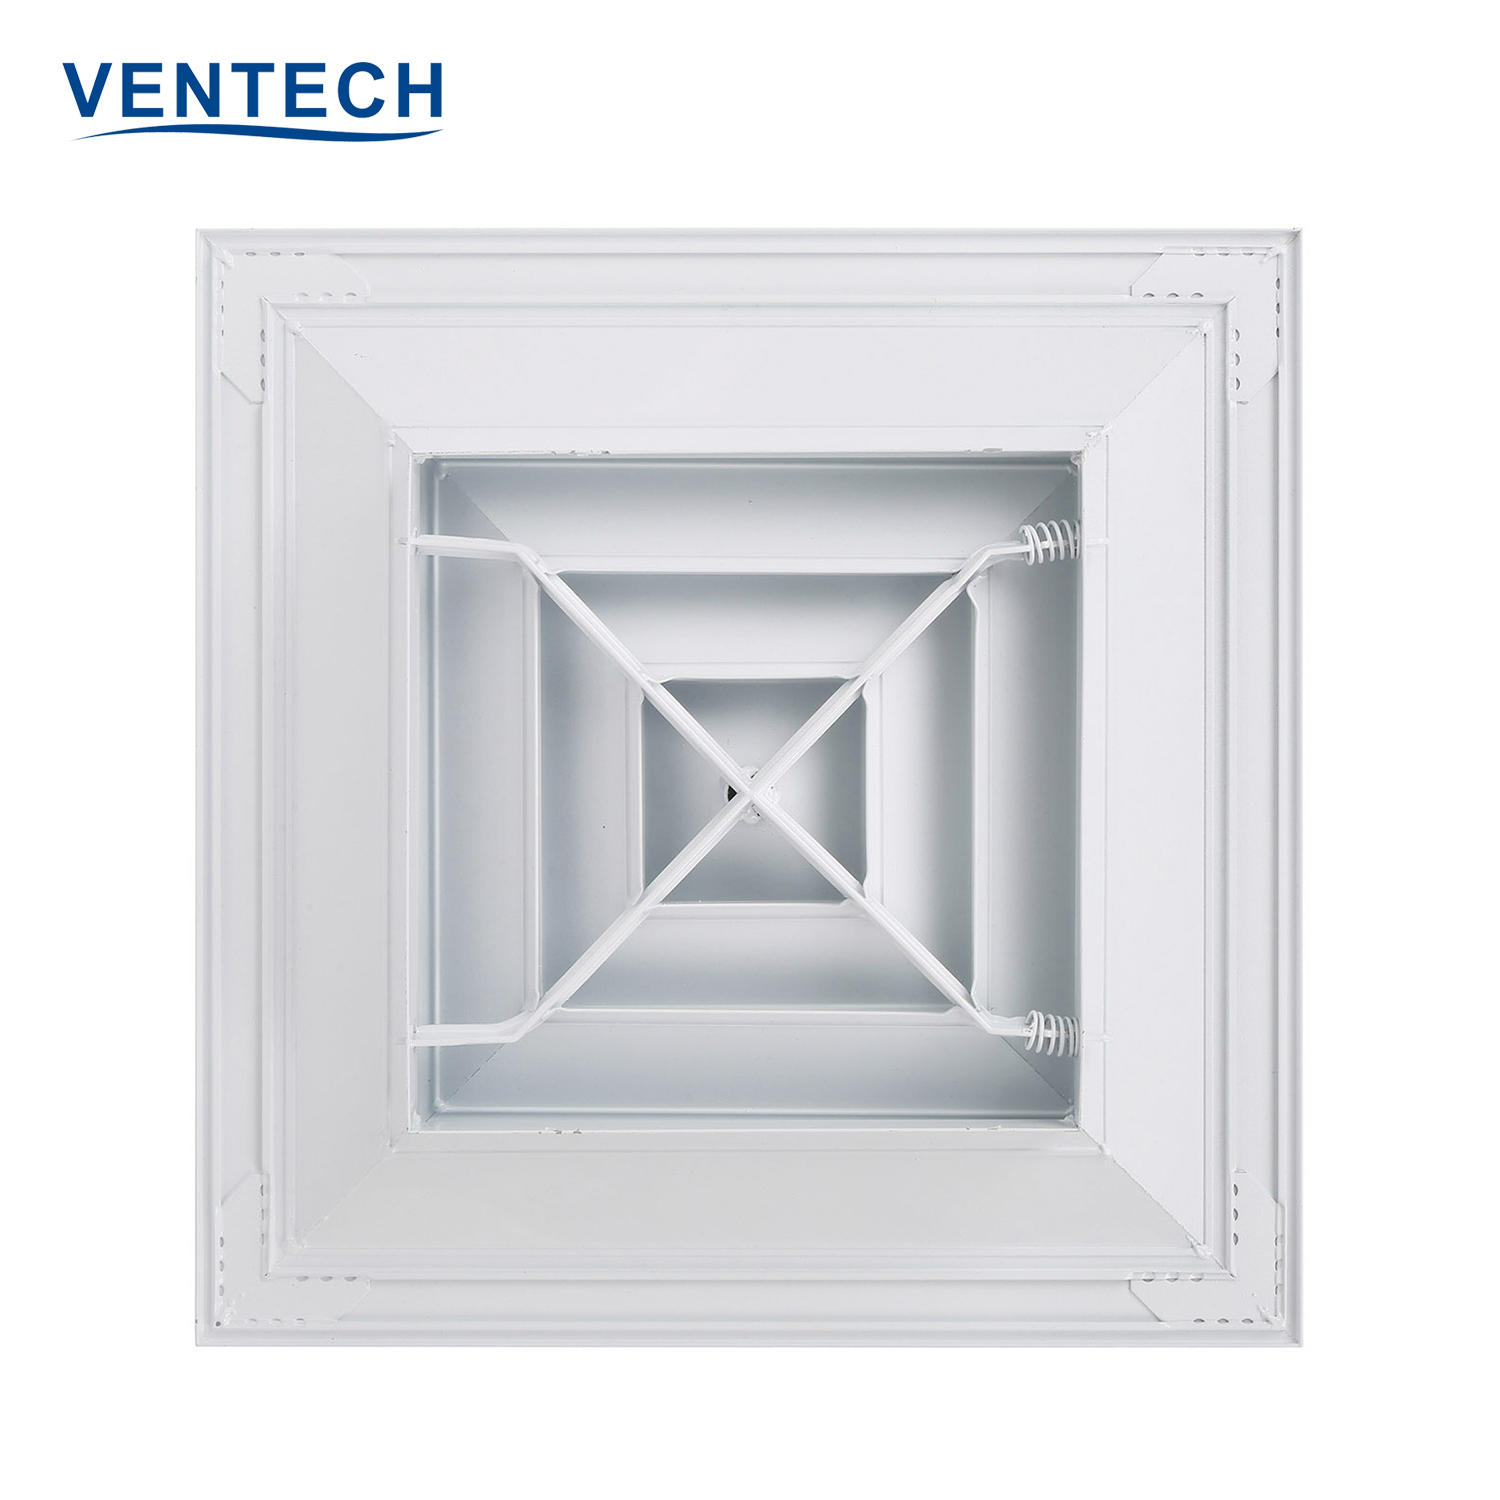 VENTECH Hvac System Exhaust Air Diffuser Duct Aluminum Conditioning Square 4 Way Ceiling Diffusers